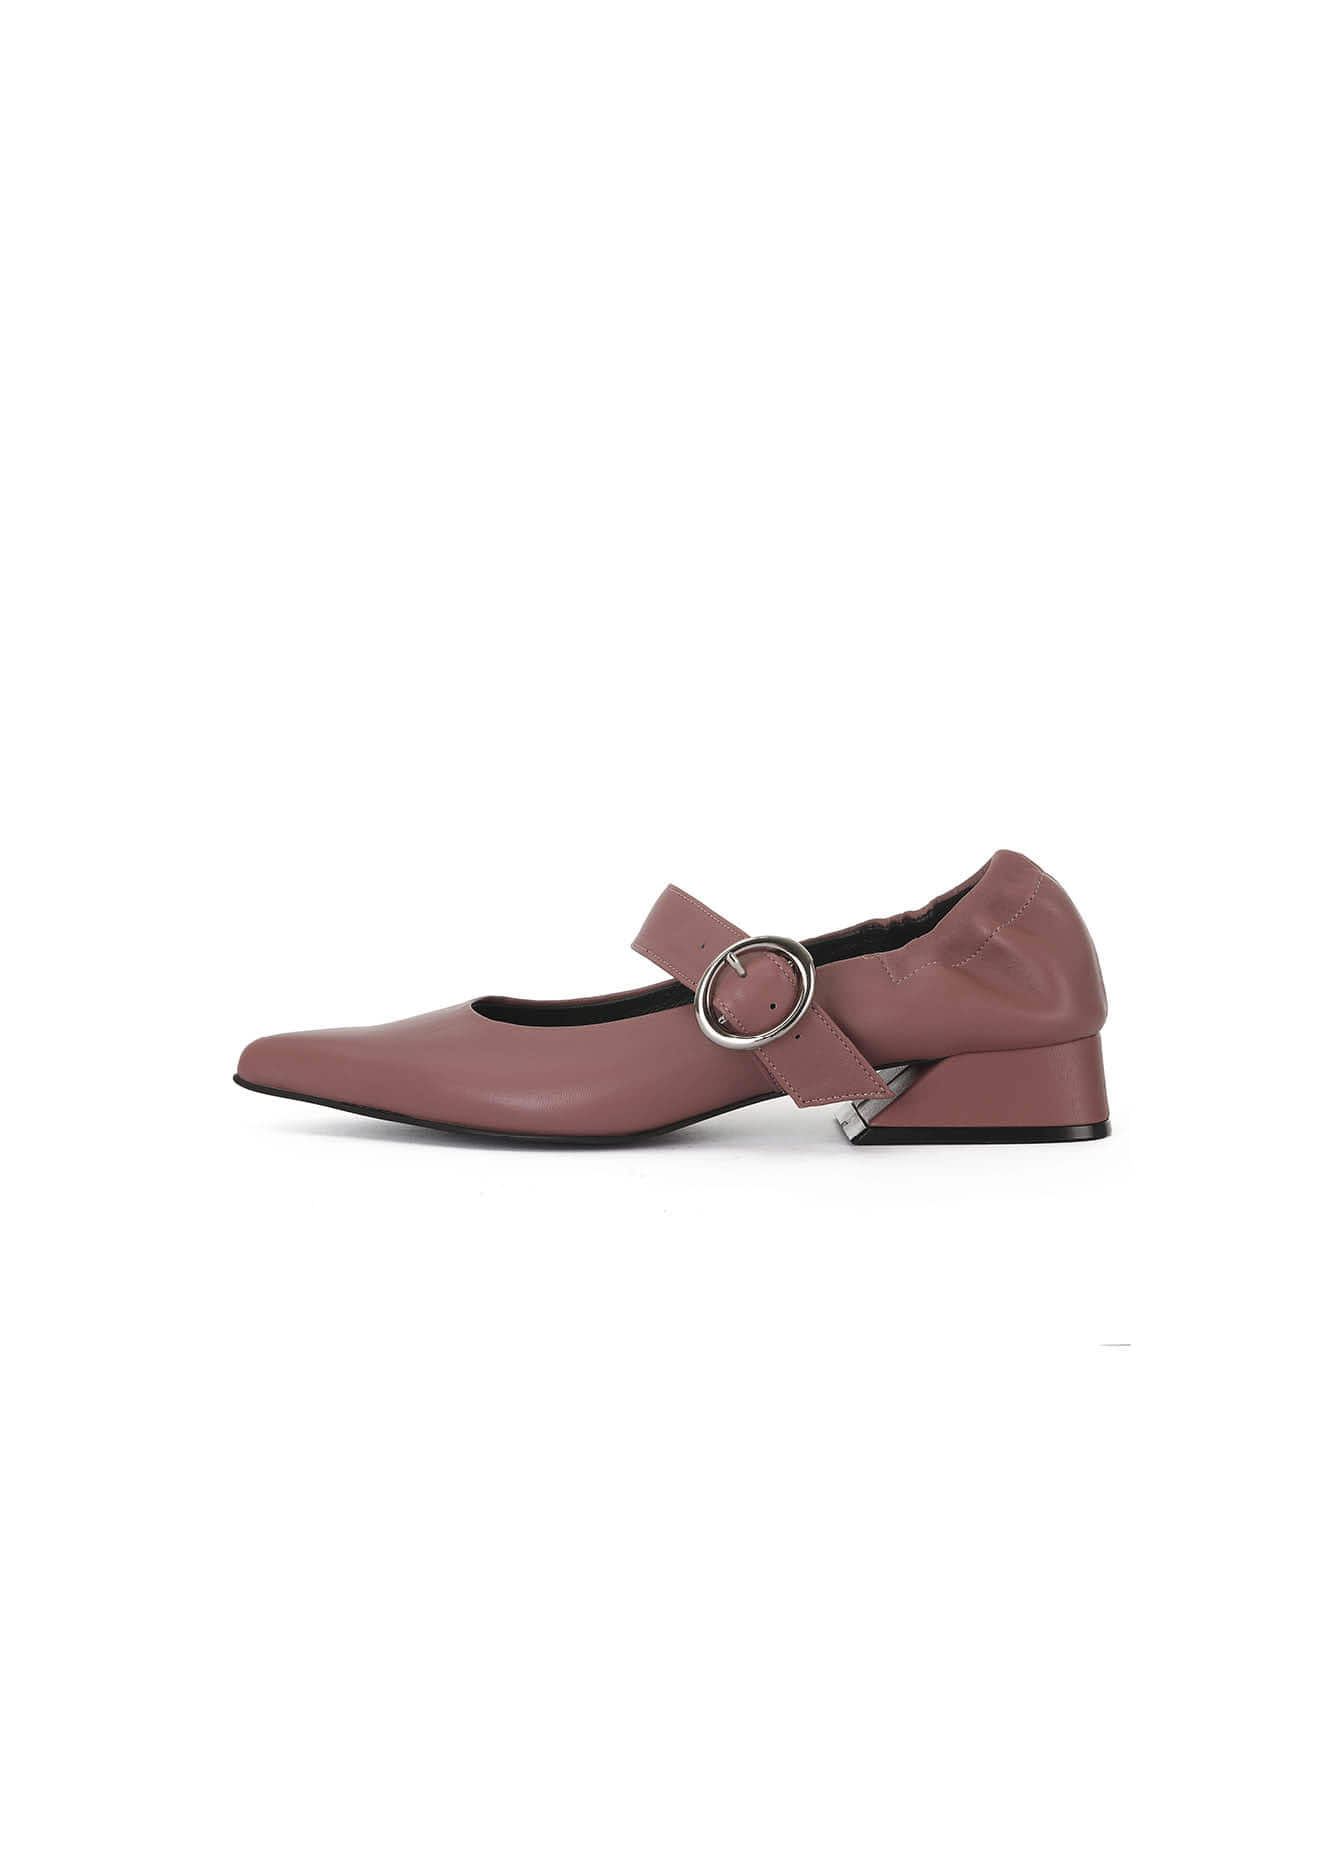 Y.11 Monica Mary-jane Flats / Y.11-F26 / 6 colors